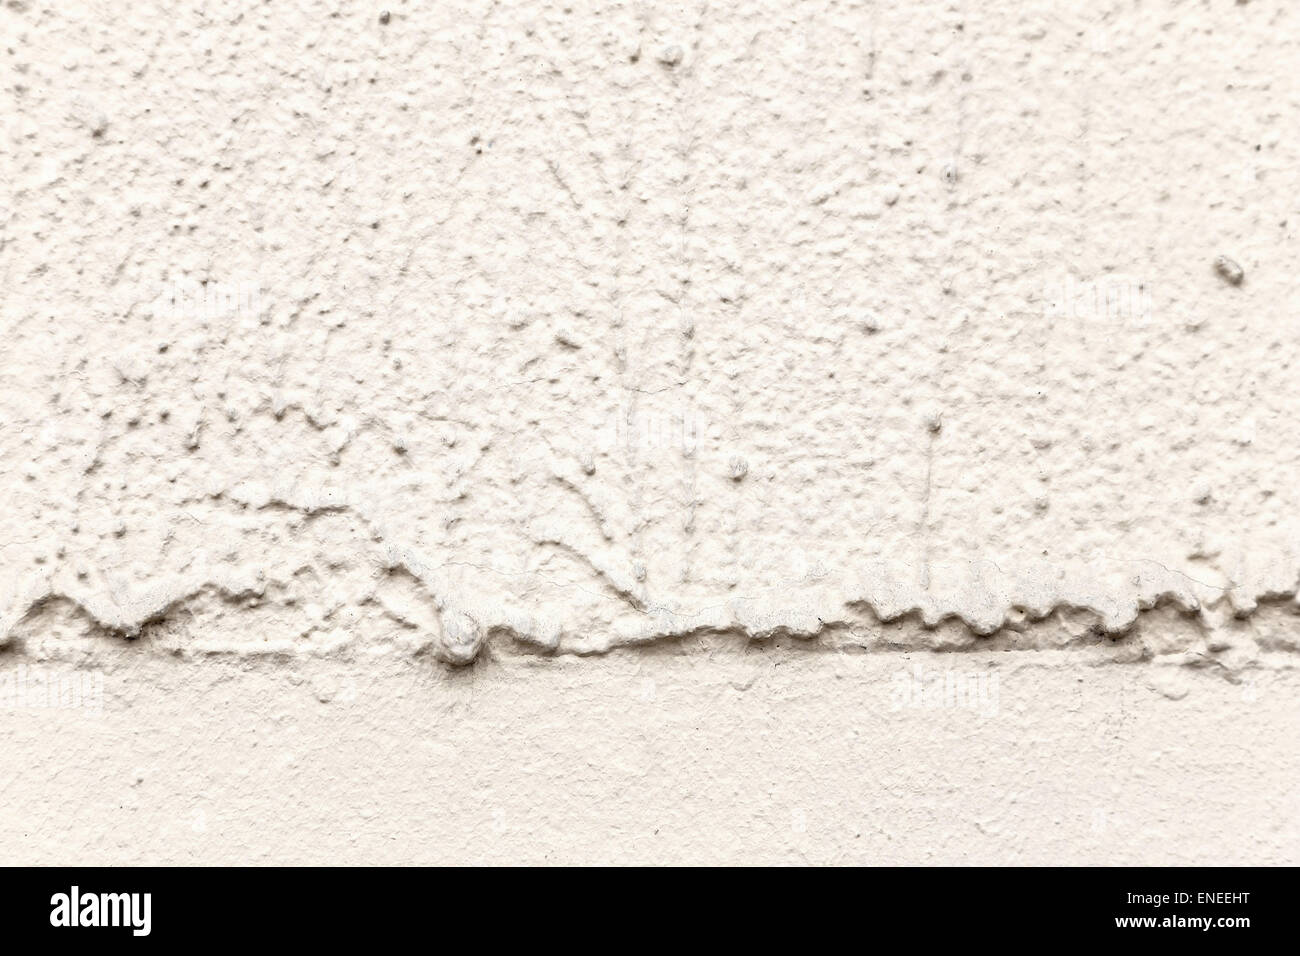 Grunge plaster cement or concrete wall texture white and gray color Stock Photo